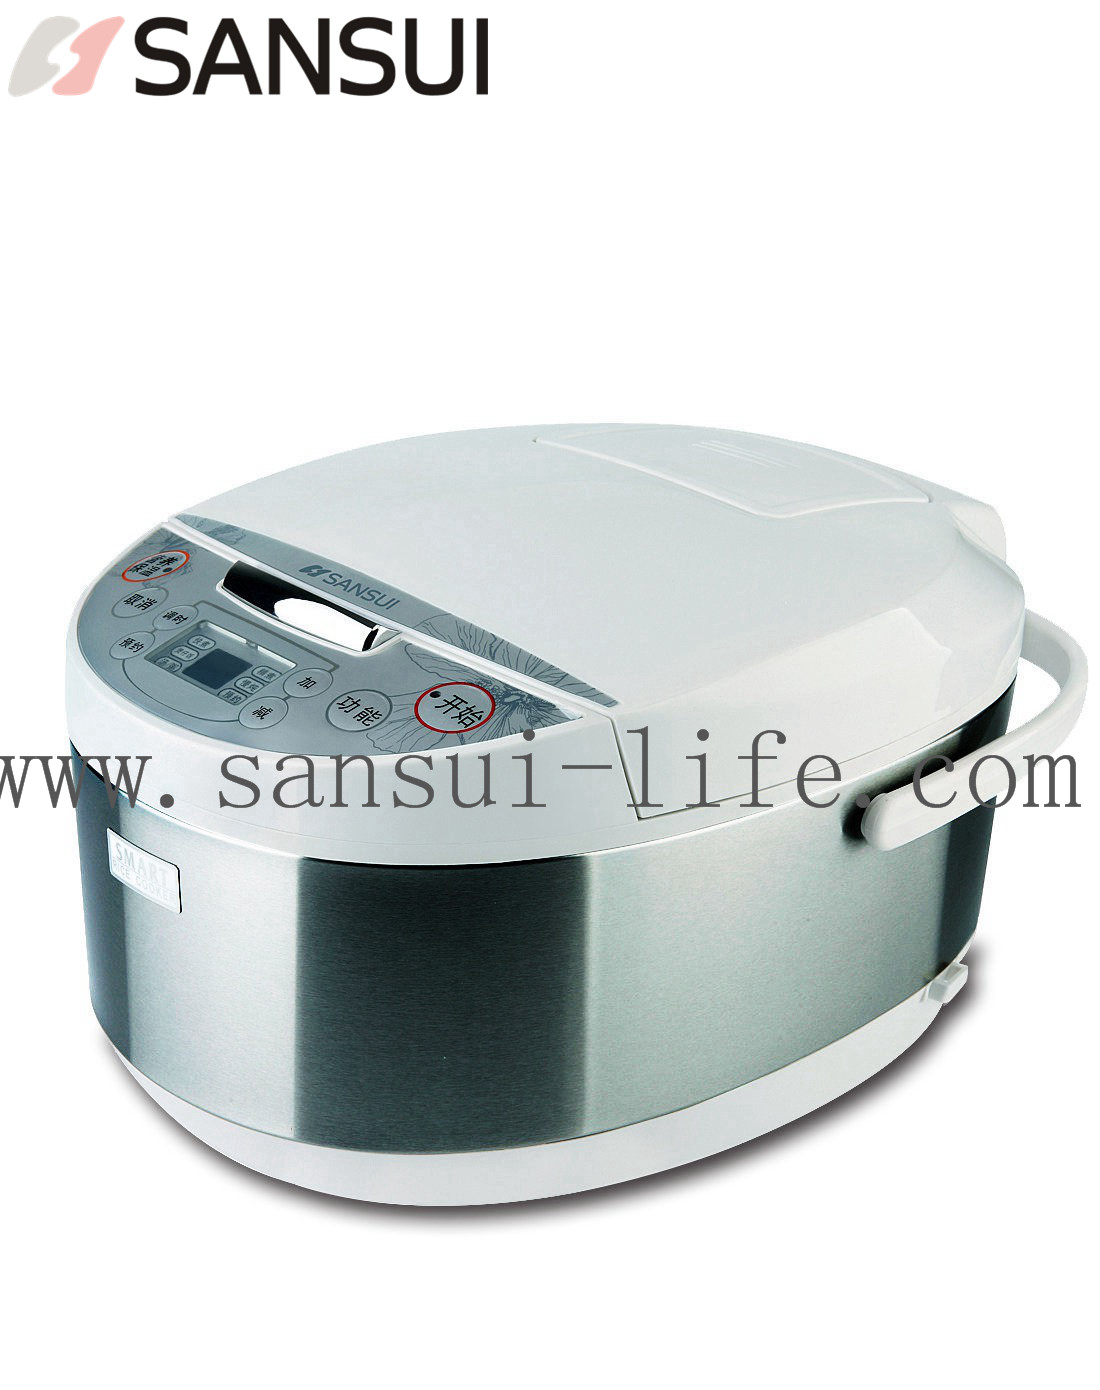 SANSUI Intelligent rice cooker, Grey&Pink two color to choose, square Rice Cooker, with 3C